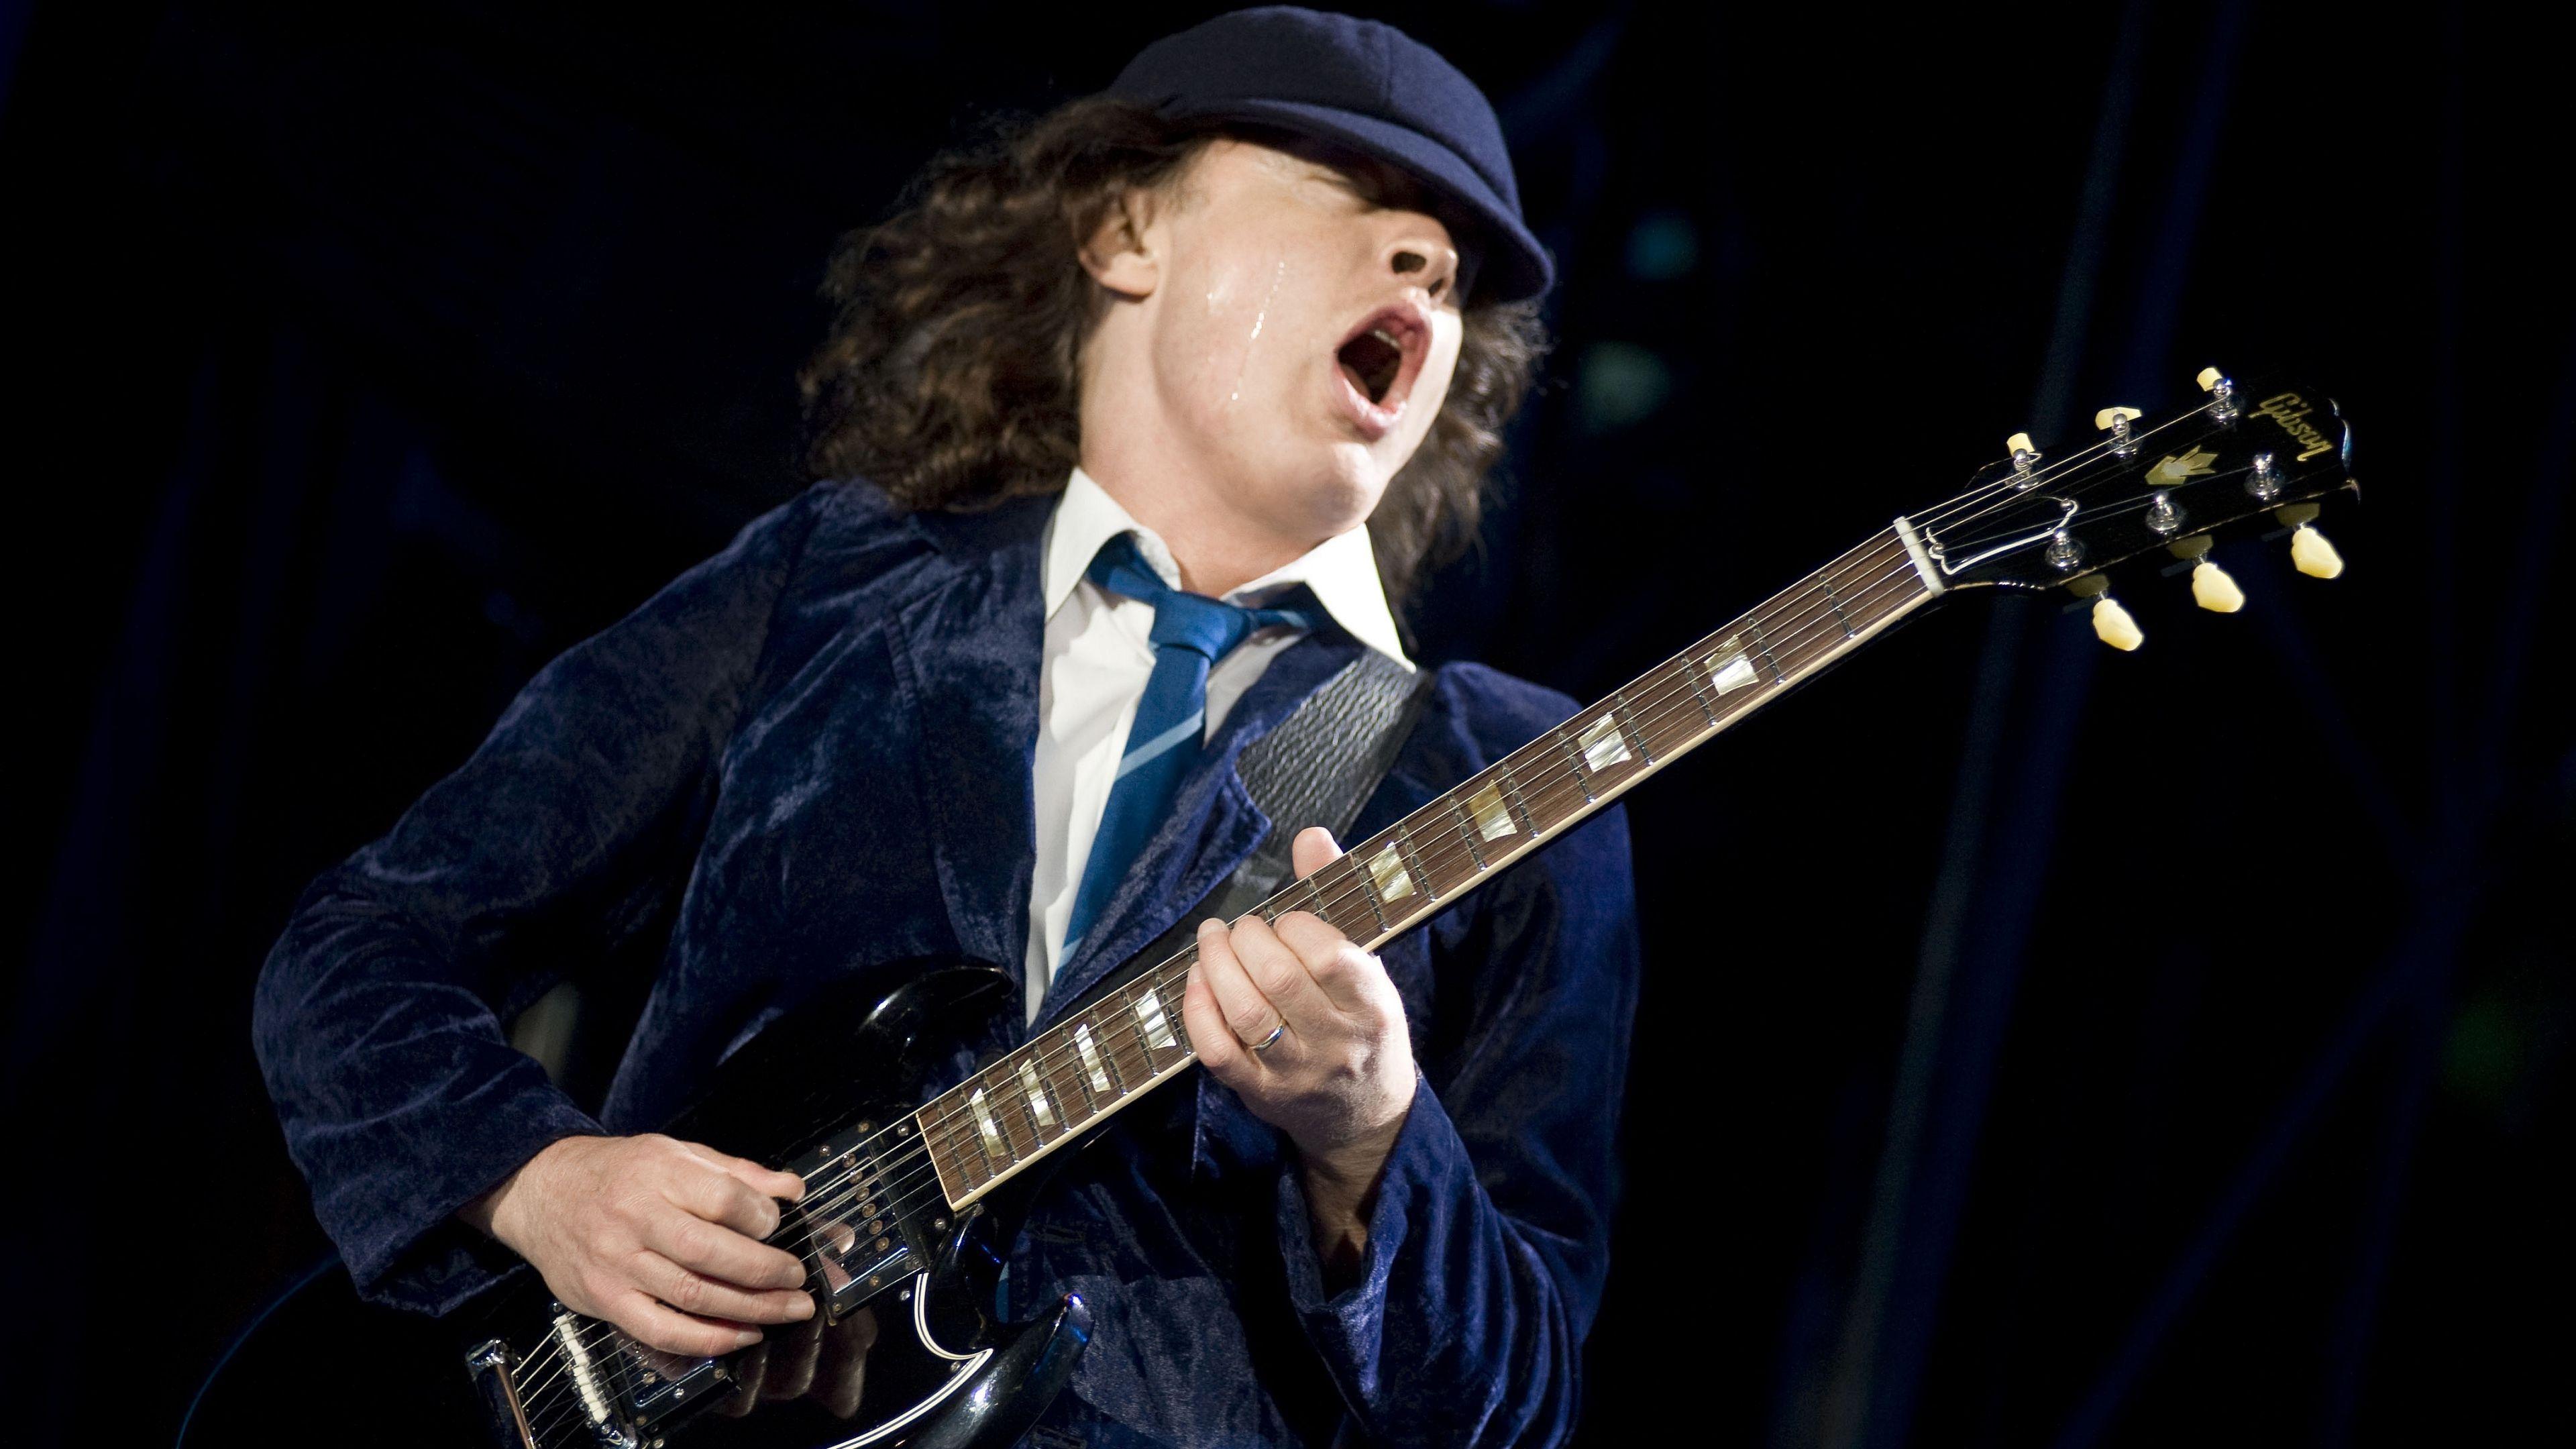 Download Wallpaper 3840x2160 Ac dc, Angus young, Guitarist